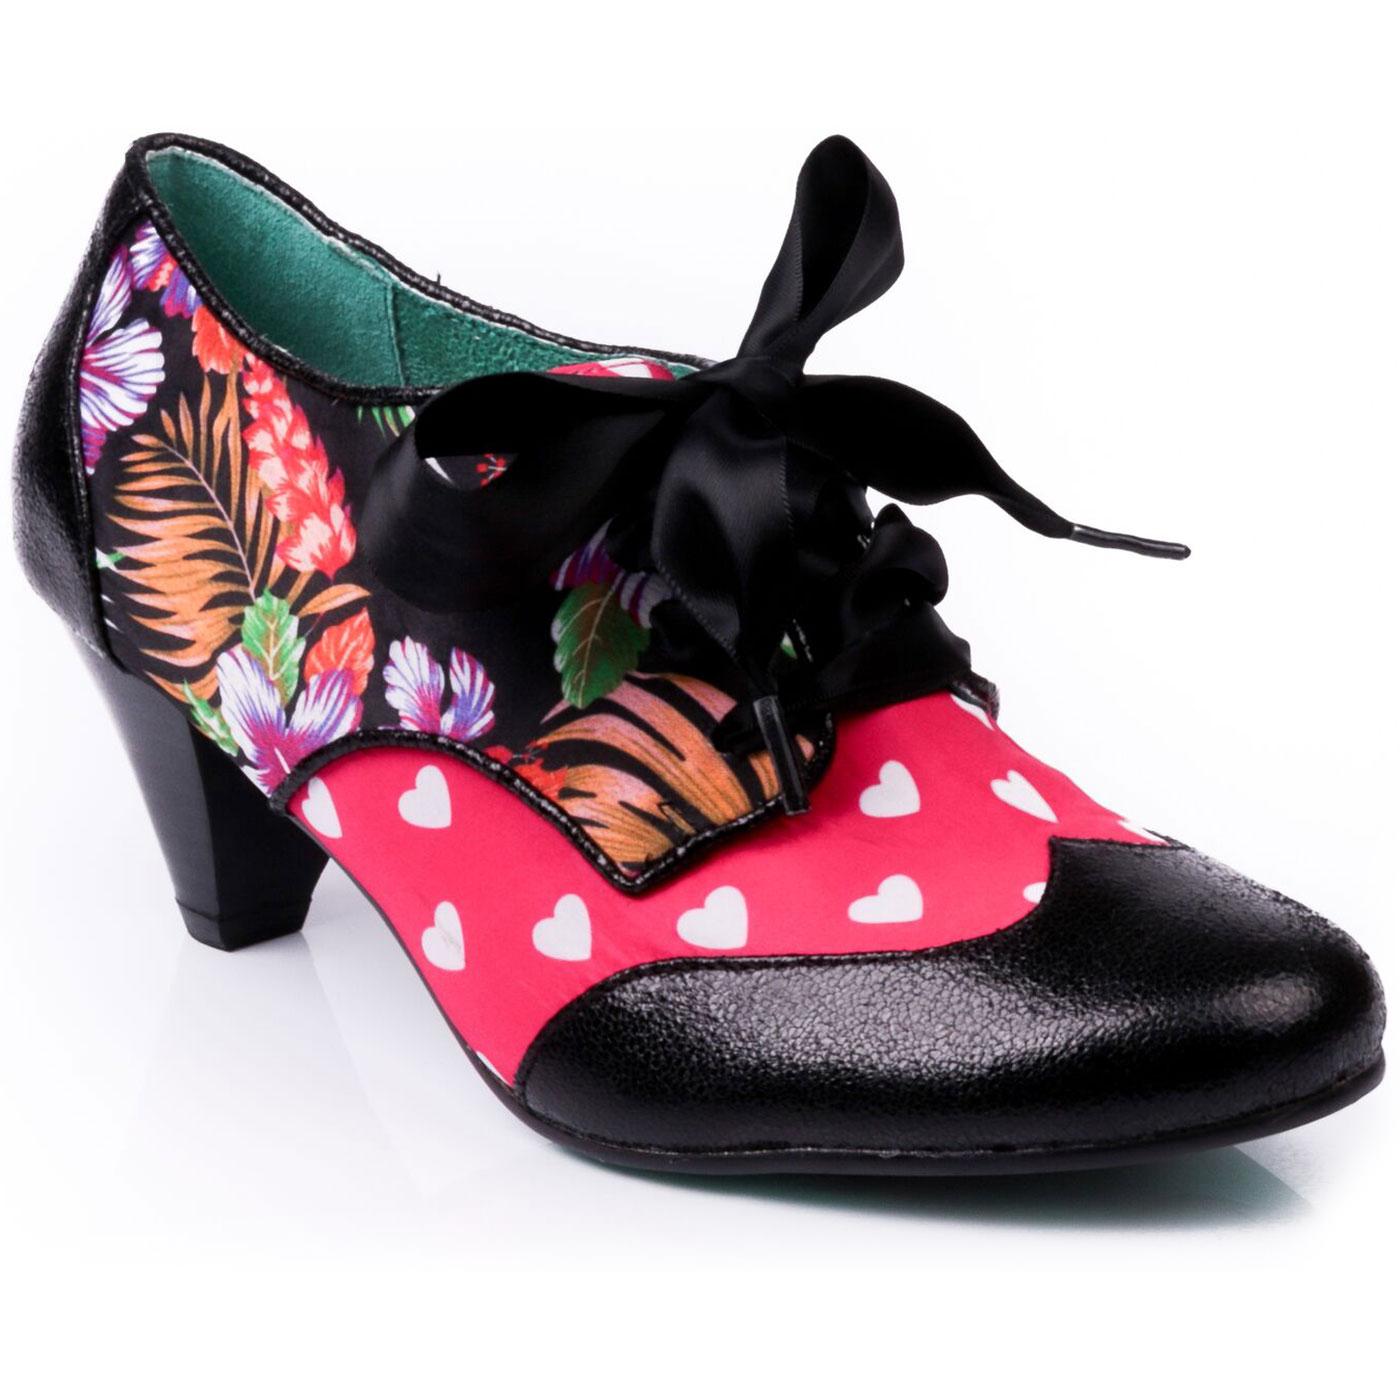 End Of Story POETIC LICENCE Floral & Heart Shoes B